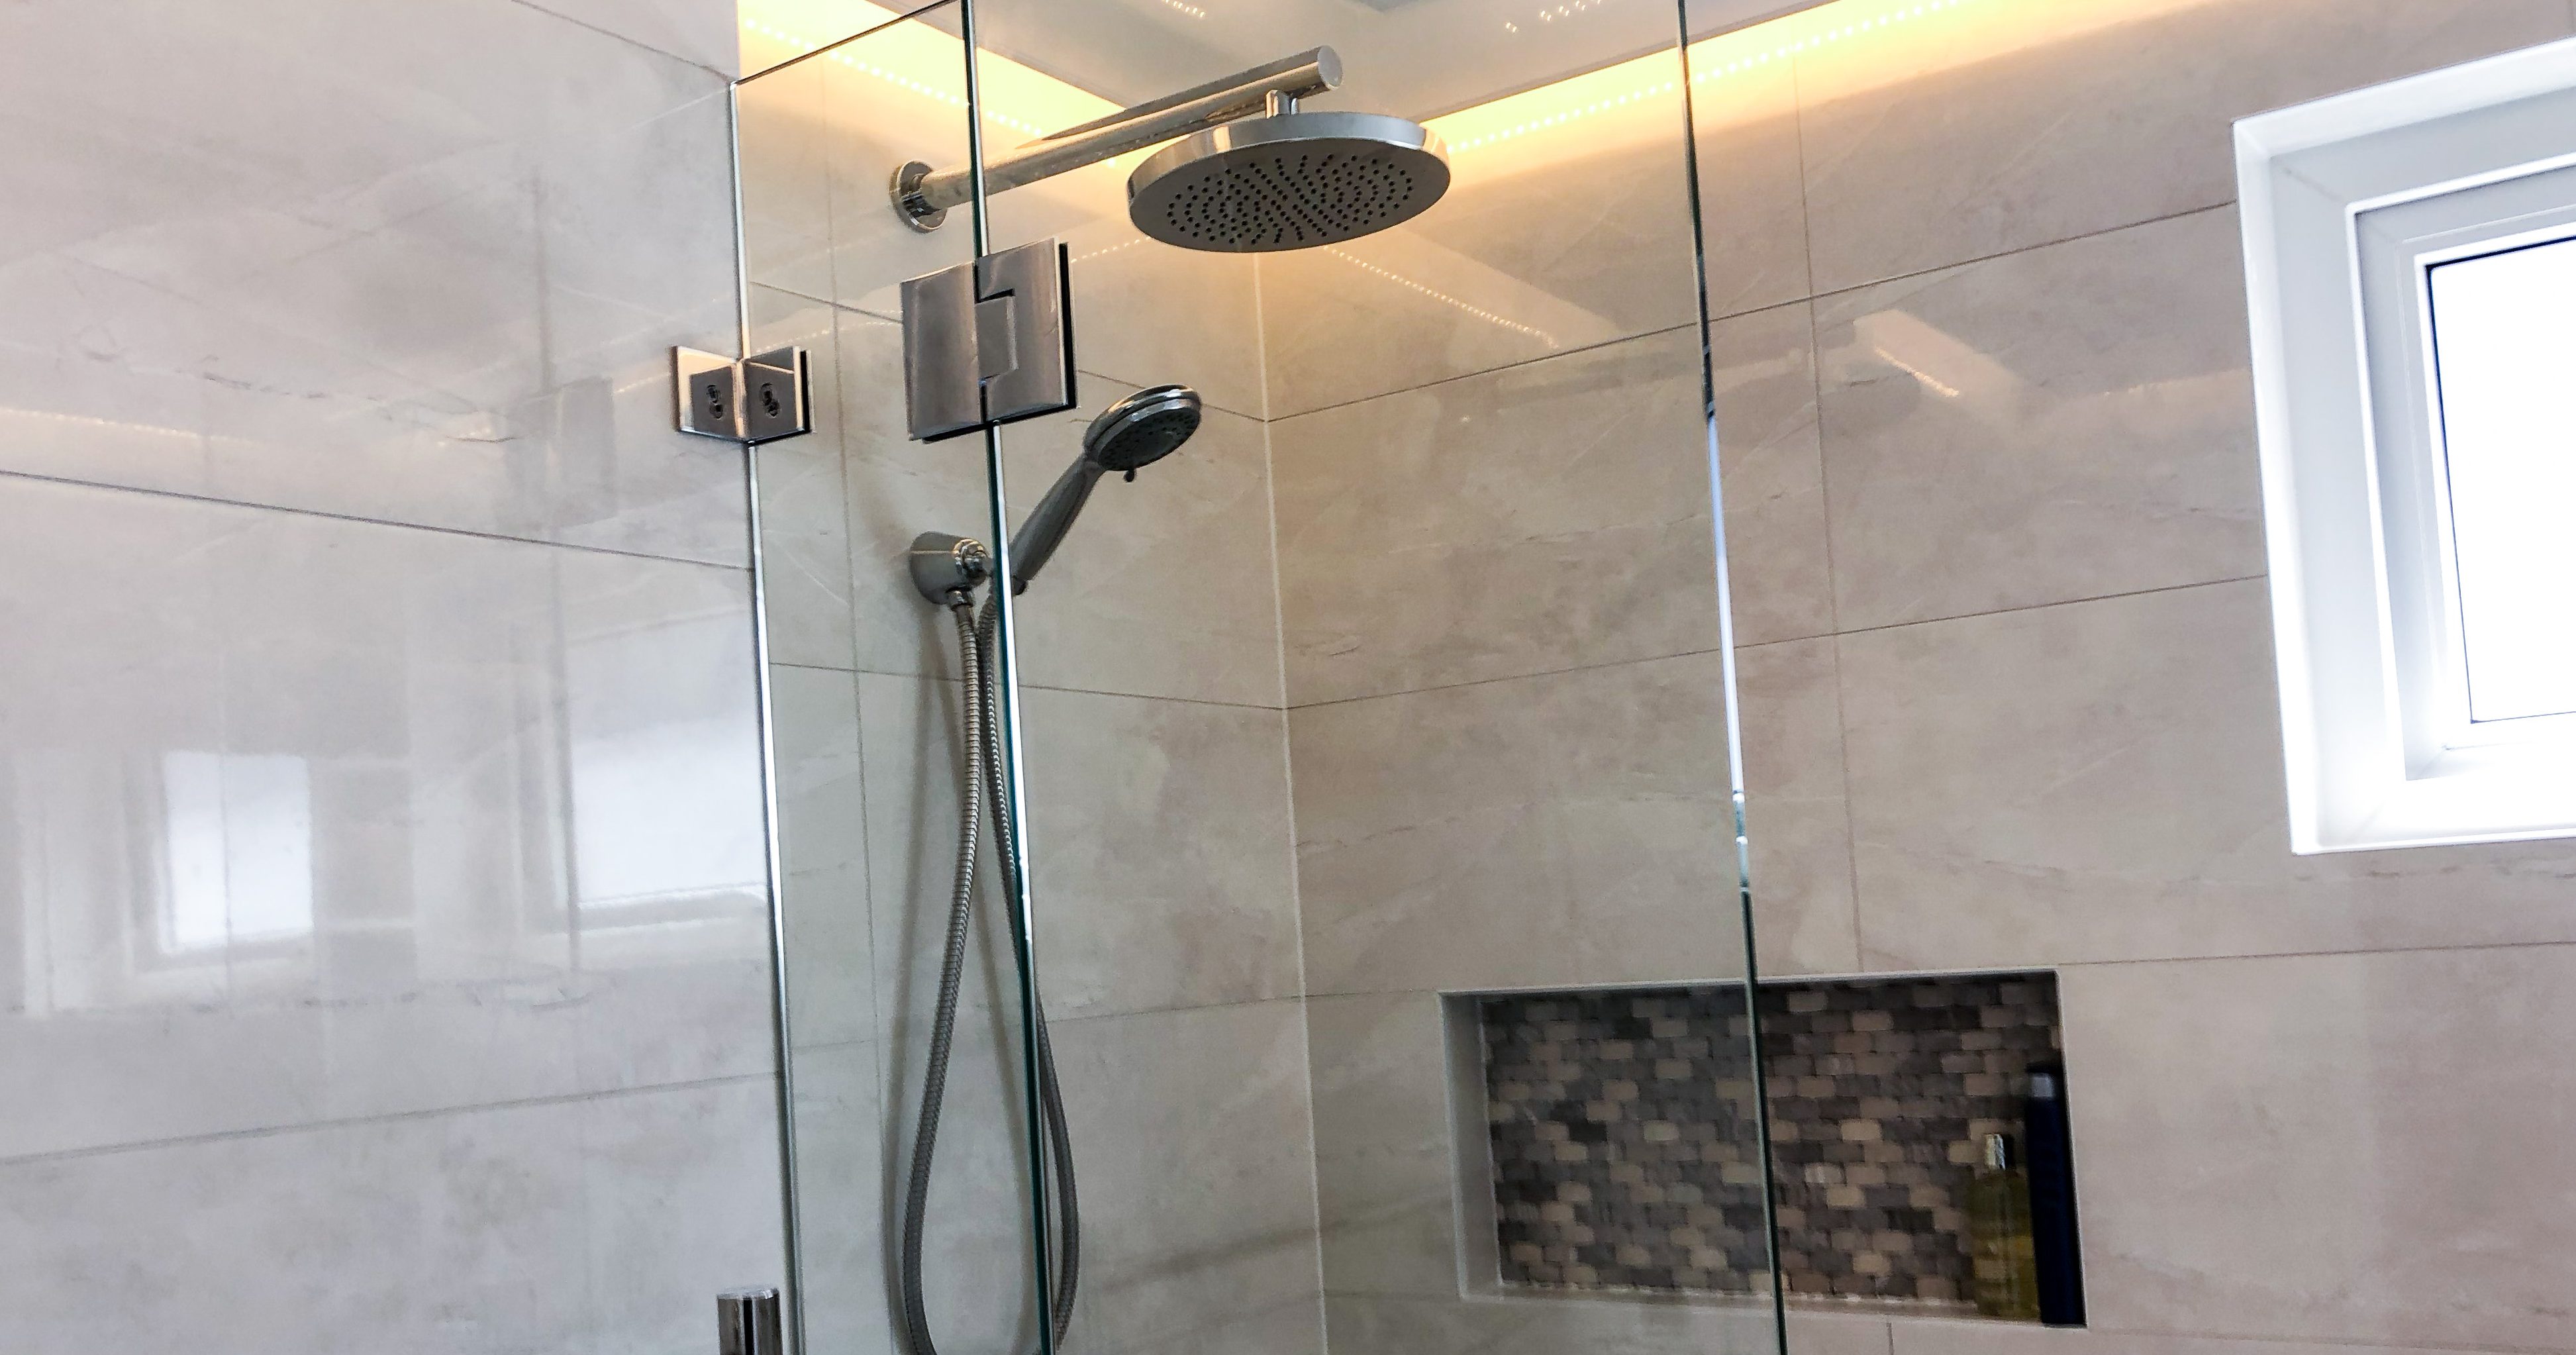 Beautiful chrome rainfall shower with hand held shower rose, shower niche and feature lighting in drop down ceiling - bathroom renovation by Master Bathrooms & Kitchens.